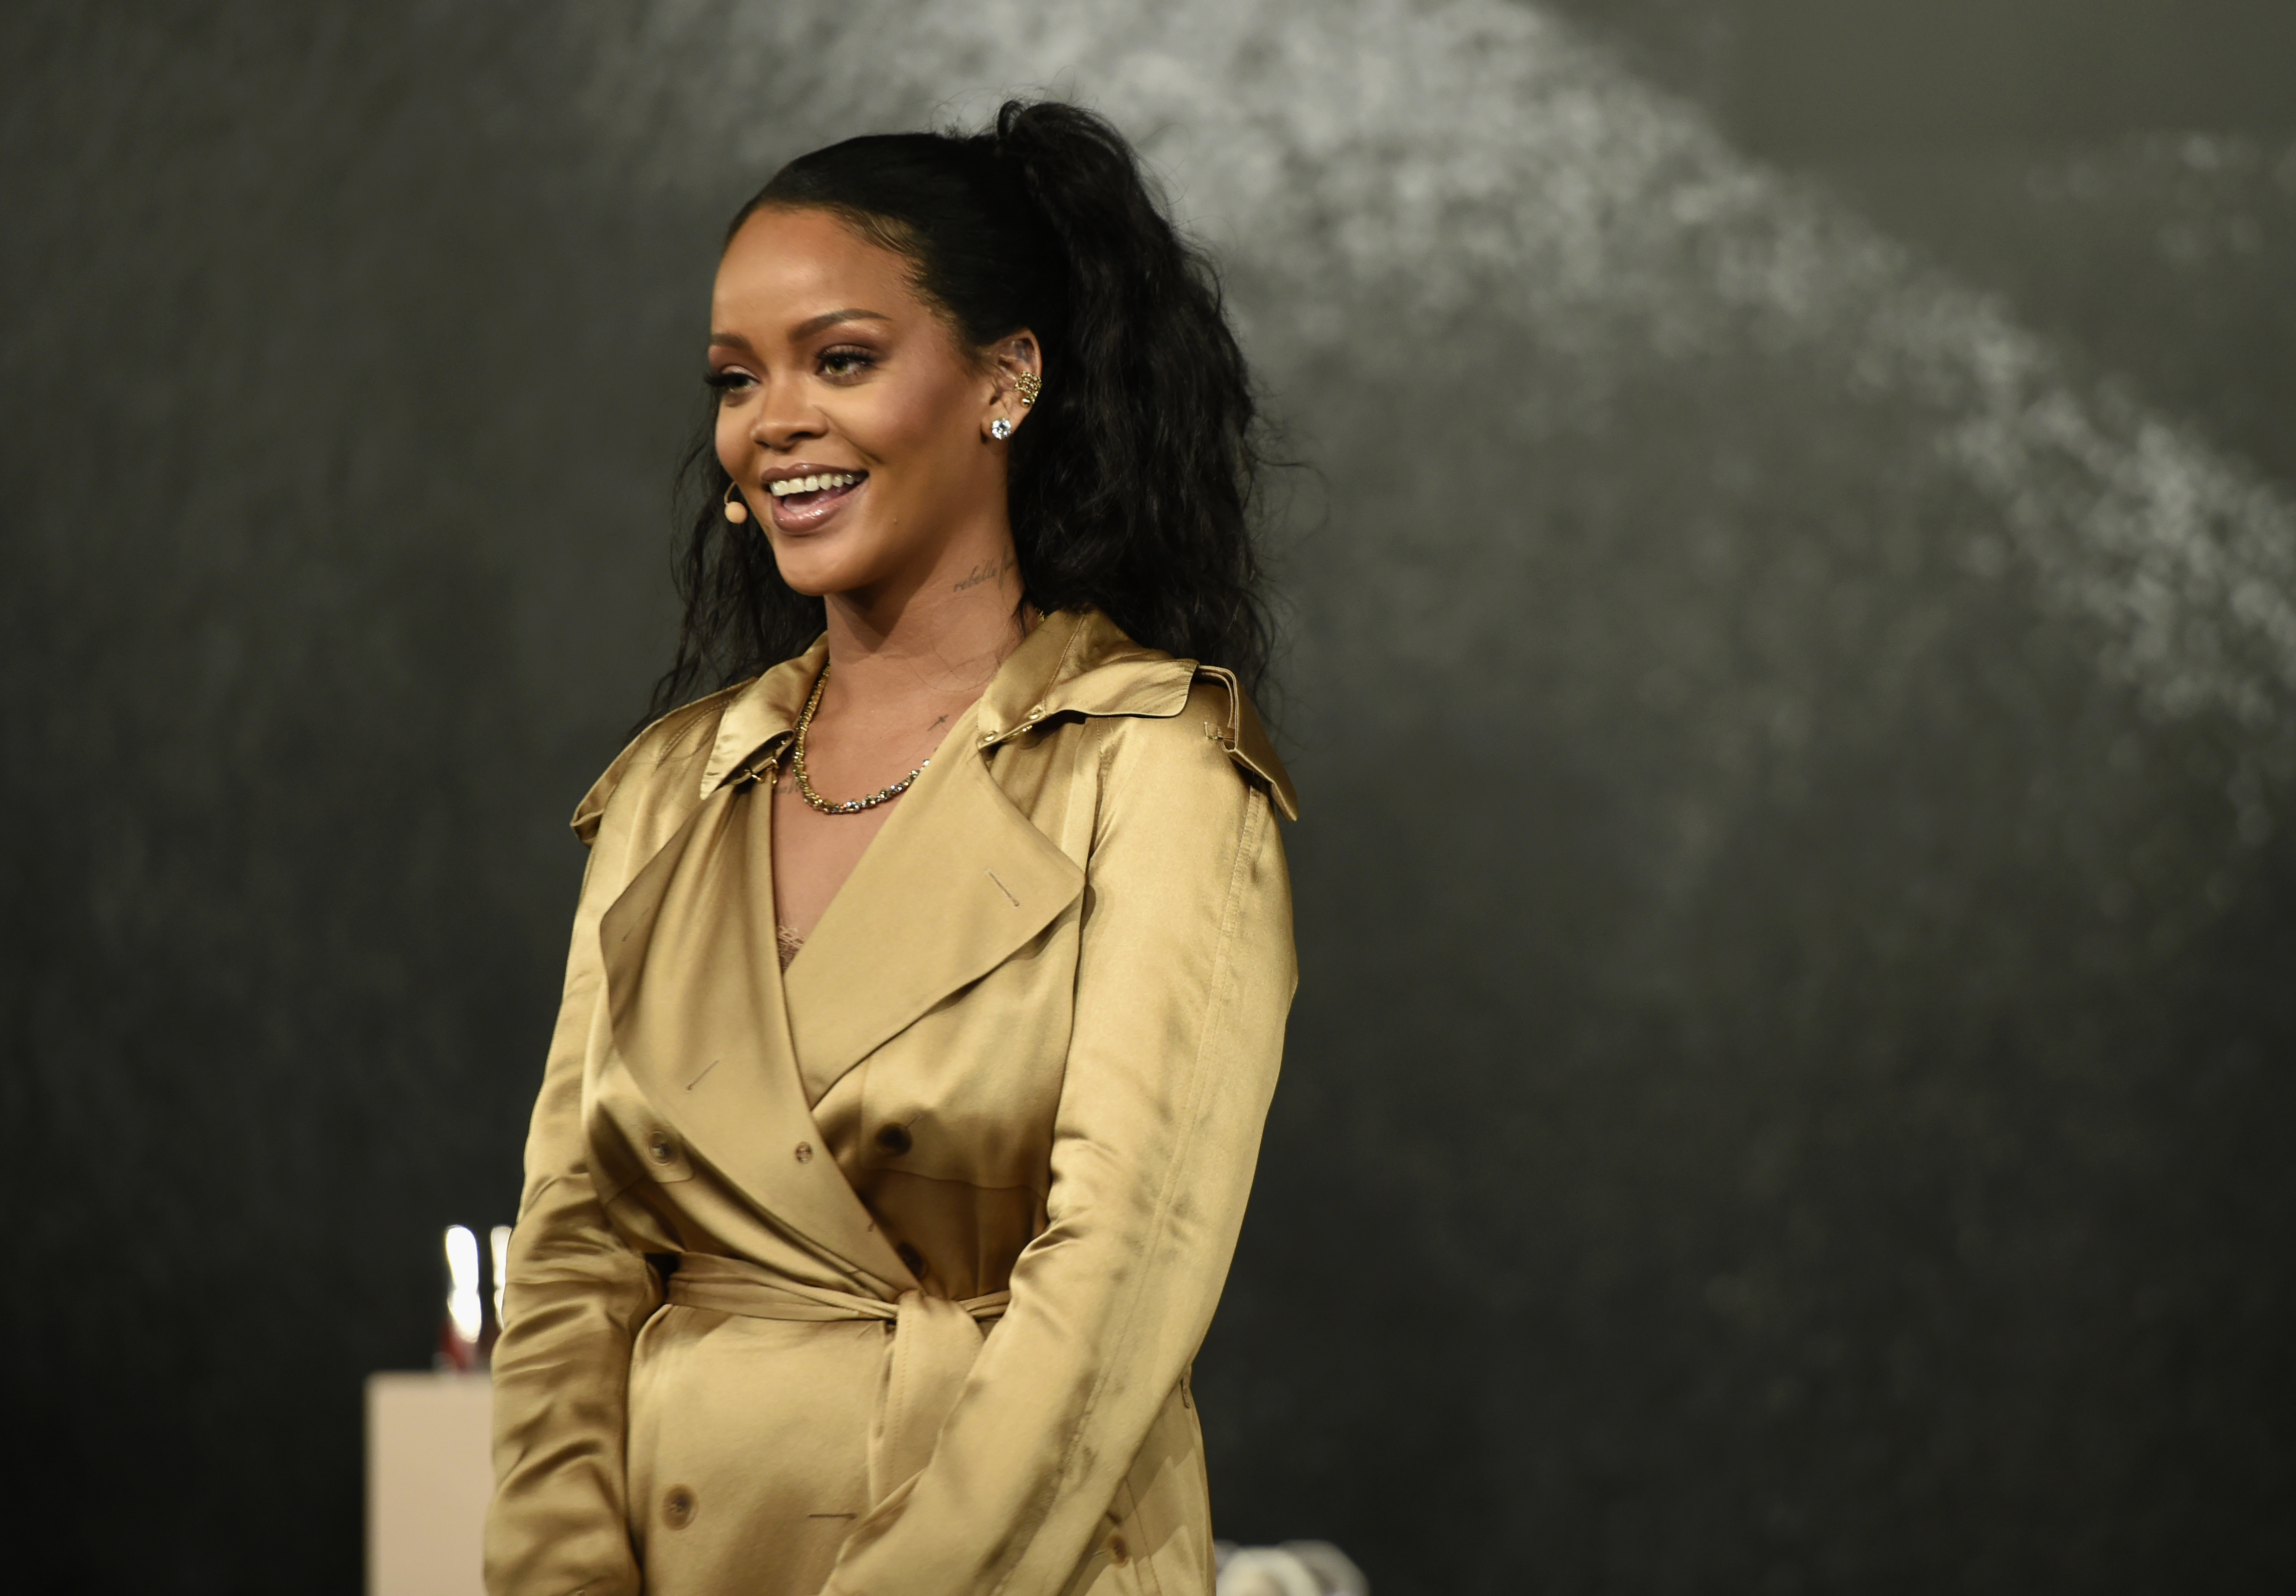 Rihanna becomes first woman to launch fashion brand at LVMH